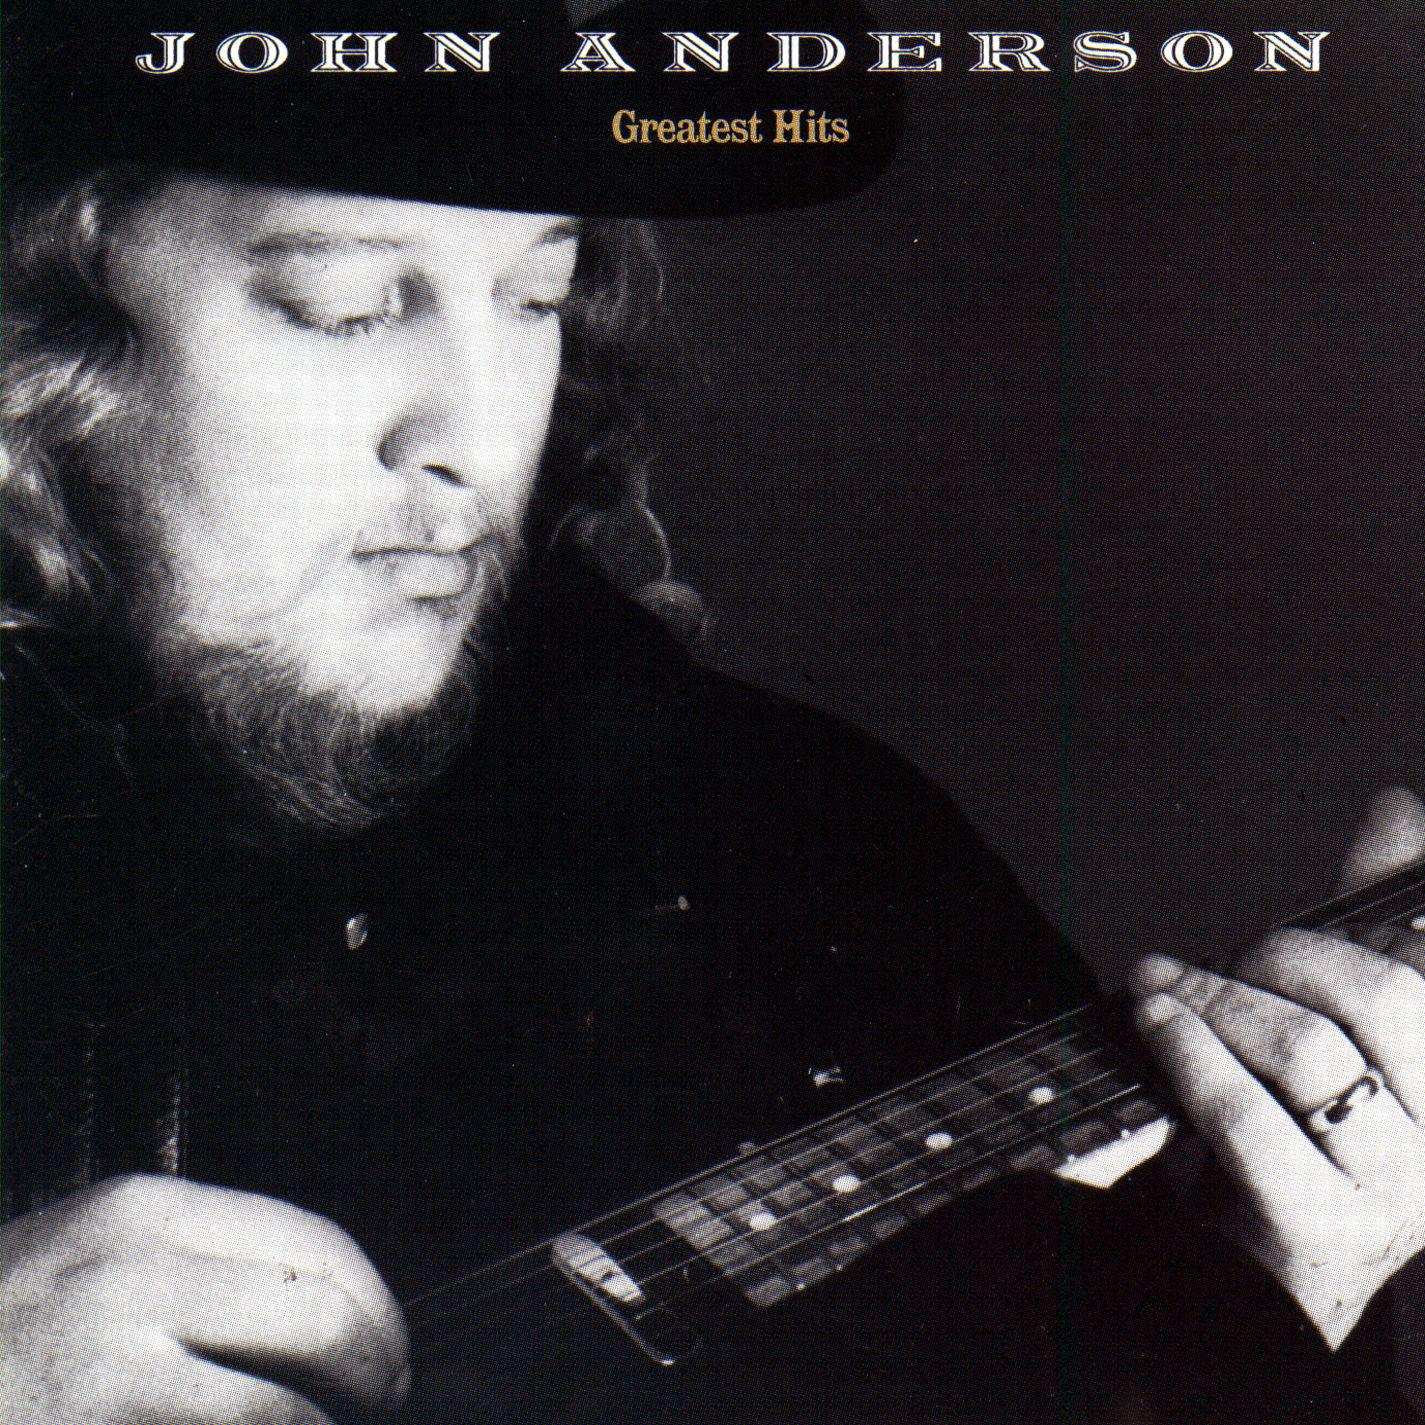 John Anderson - Wild and Blue